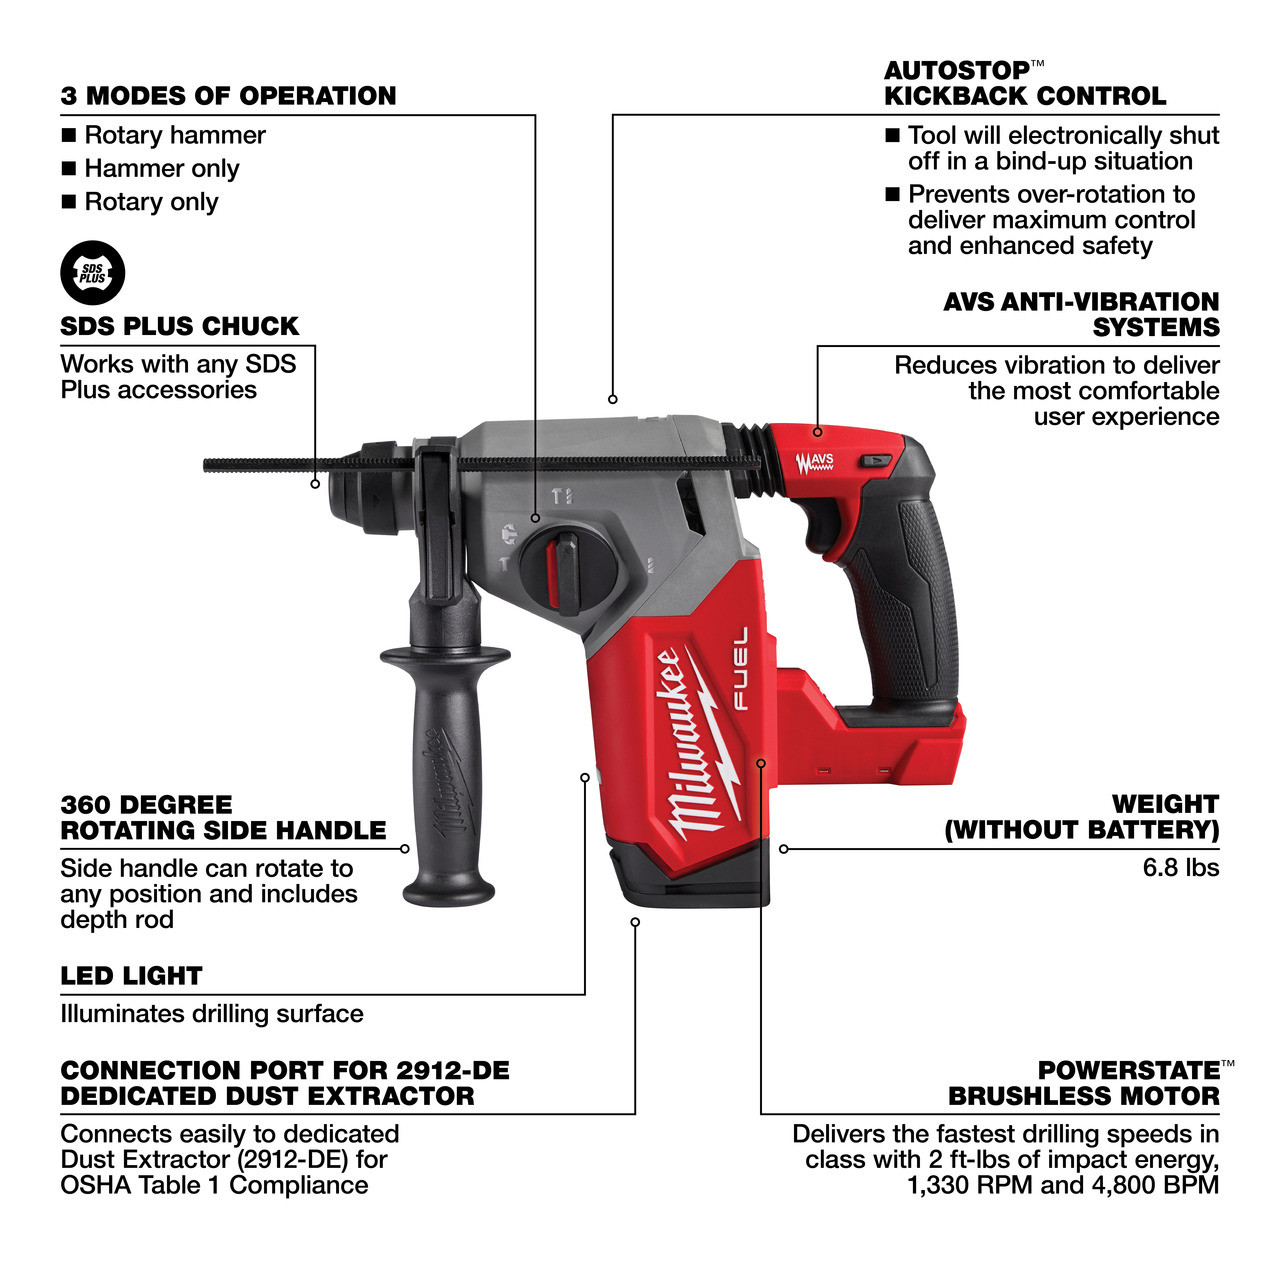 M18 FUEL™ 1 in SDS Plus Rotary Hammer